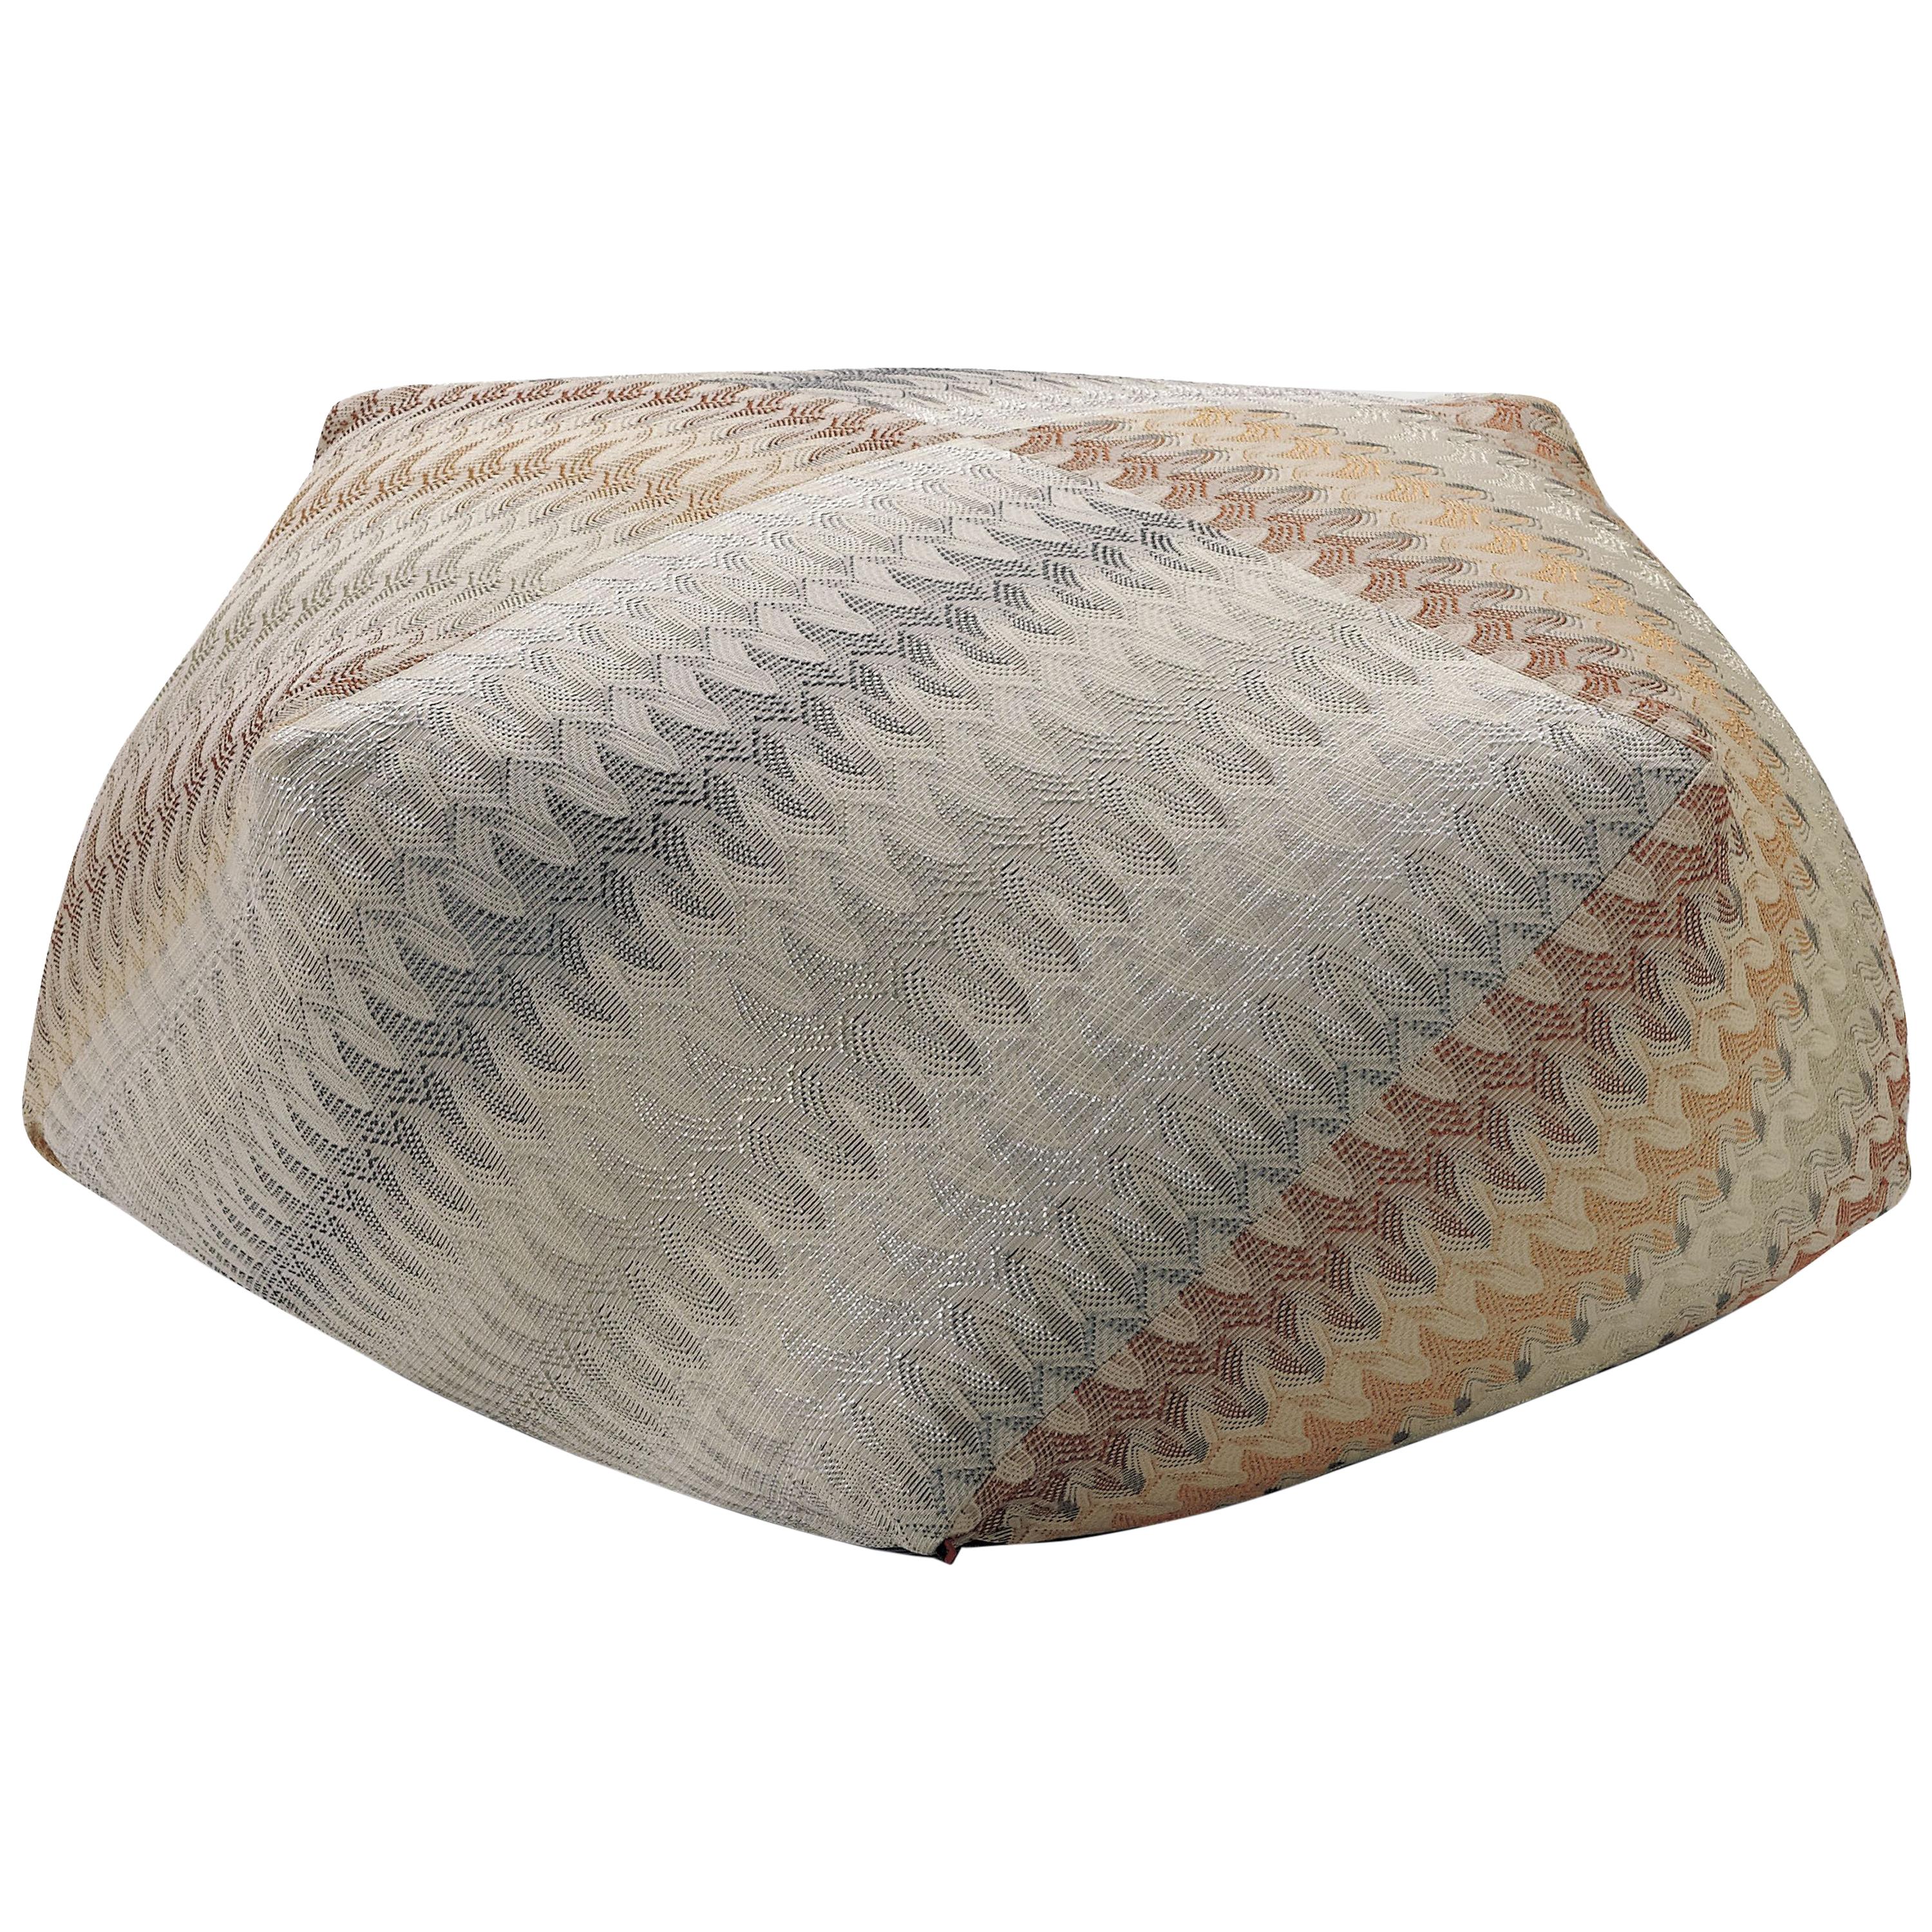 Missoni Home Remich Pw Diamante Pouf with Lace-Inspired Print in Tan For Sale